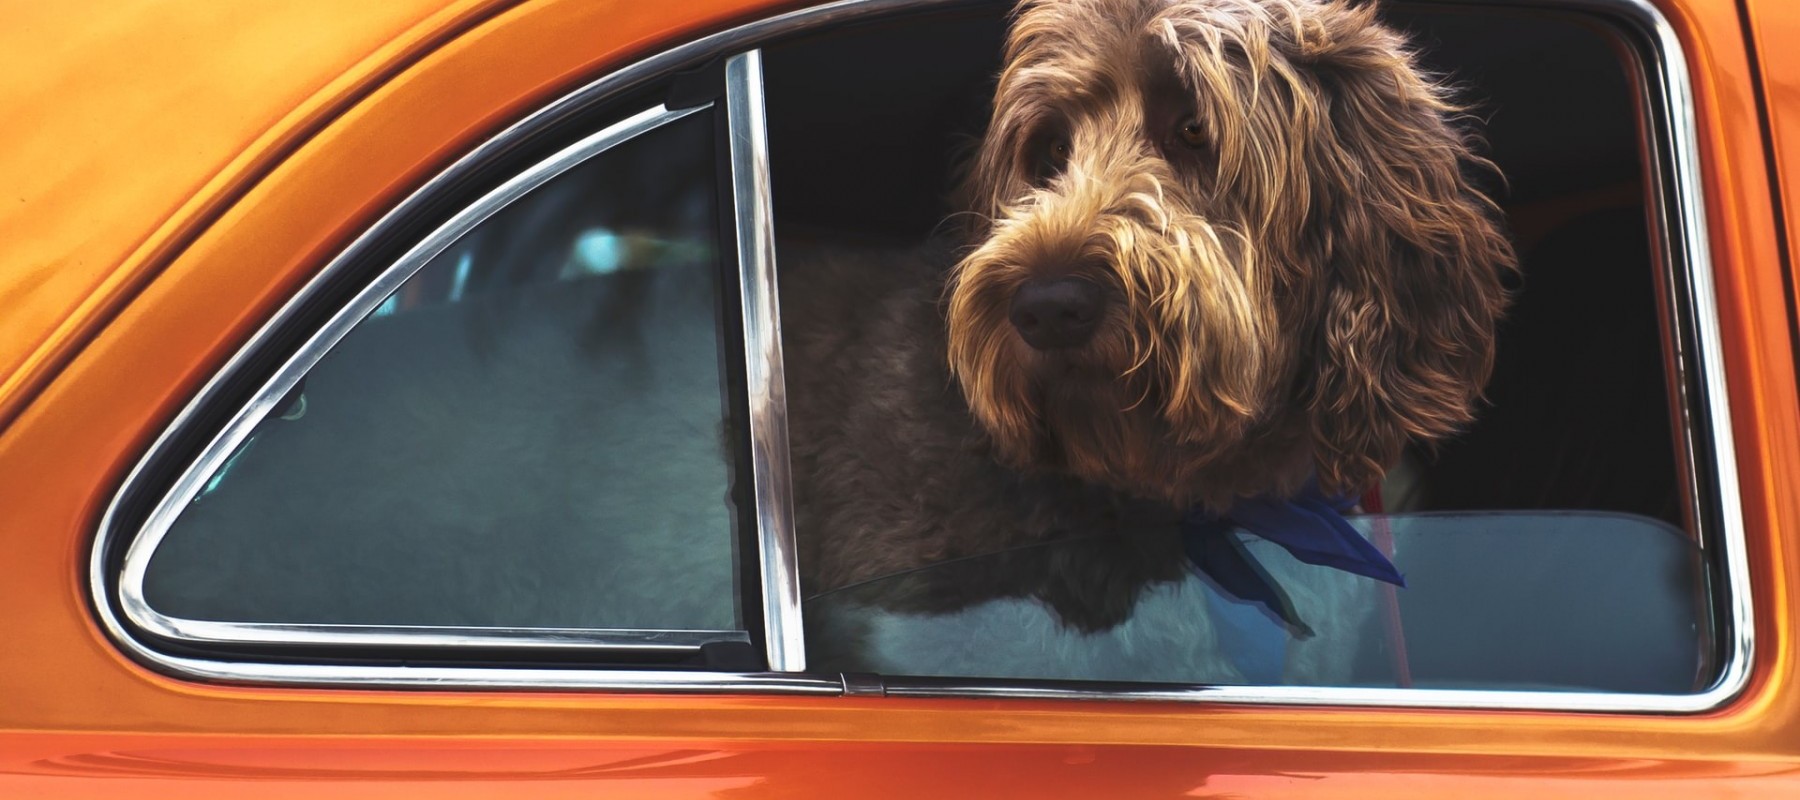 Dogs in Hot Cars - Not long is too long image